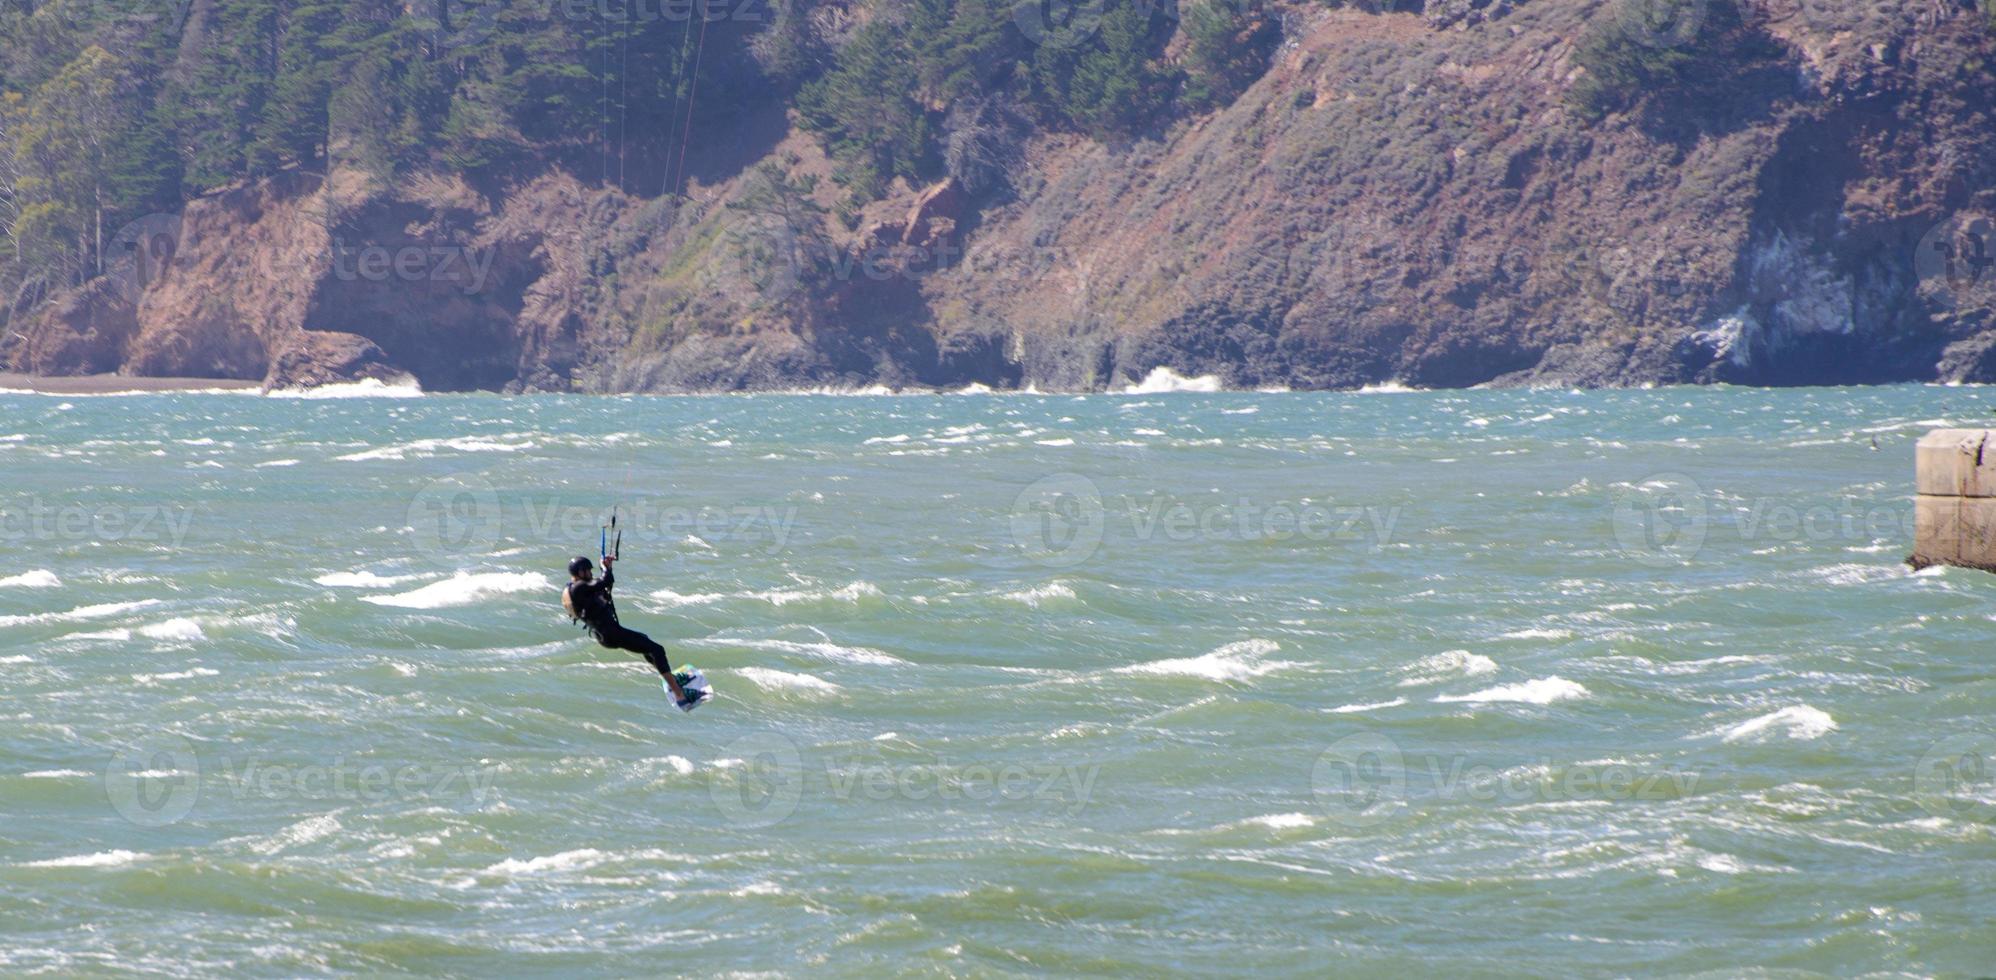 Kite surfer on the San Francisco Bay shown against the backdrop of the Marin Headlands photo